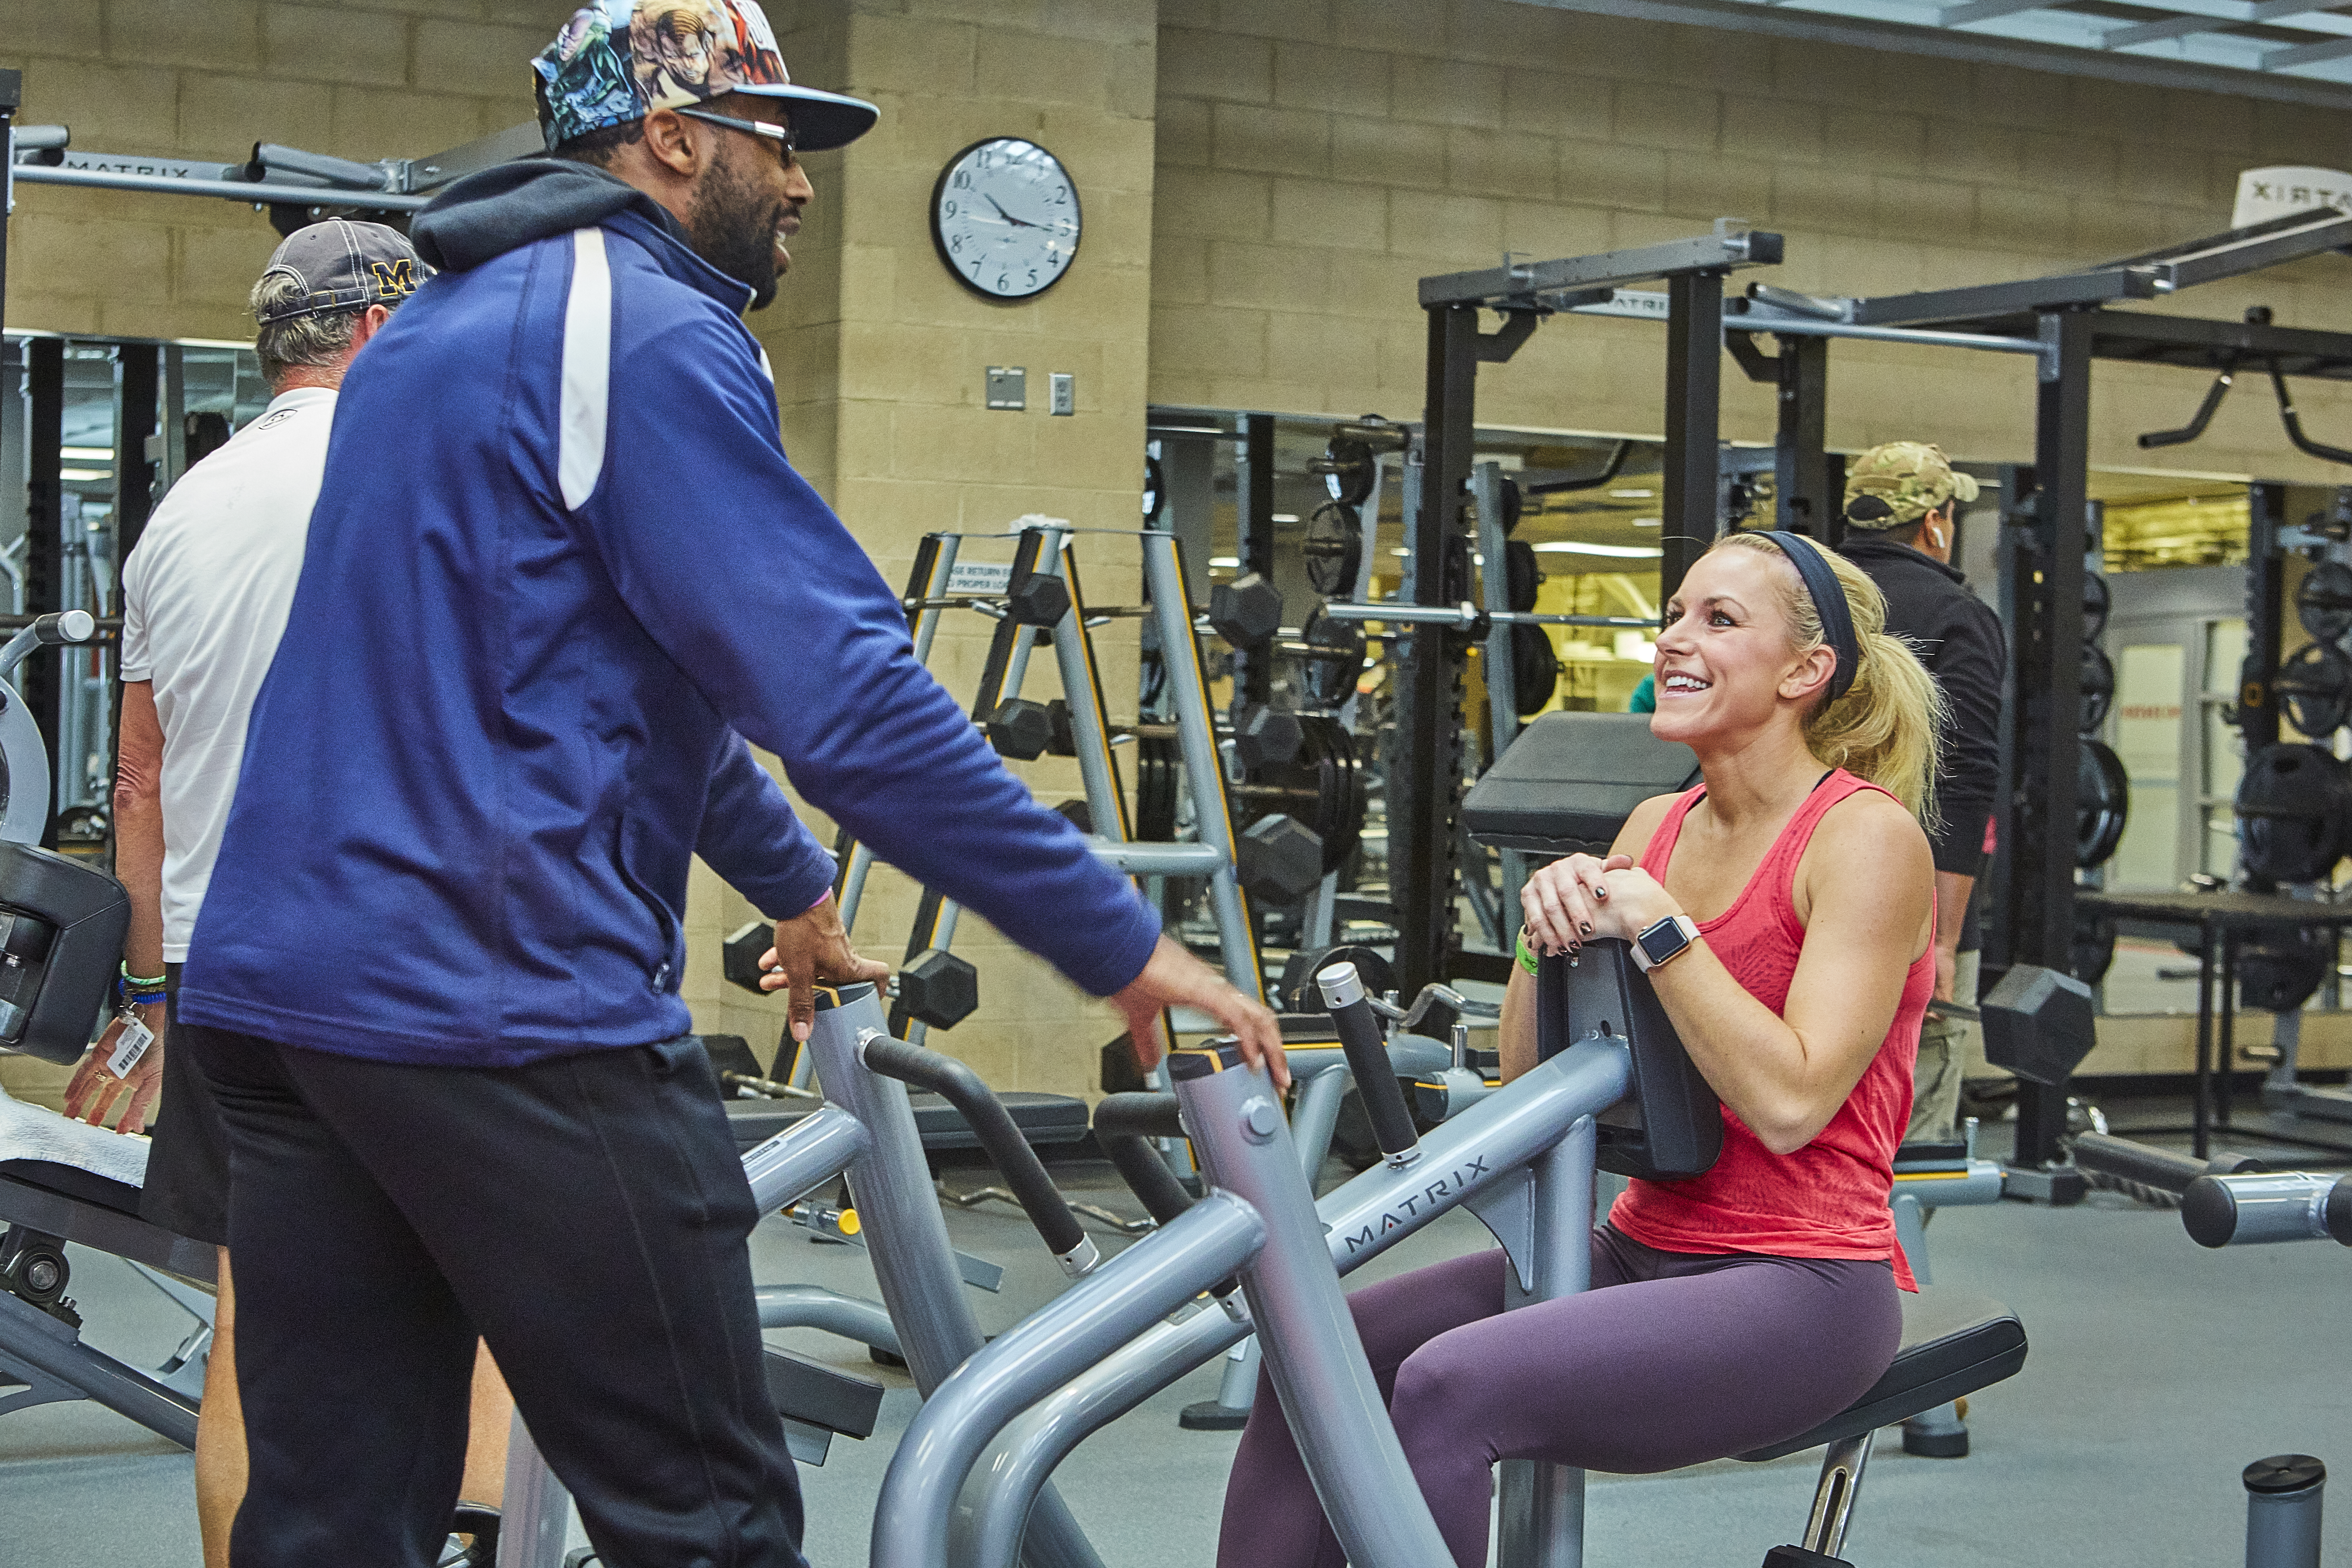 Smiling Personal Trainer at the Monon Community Center Fitness Center